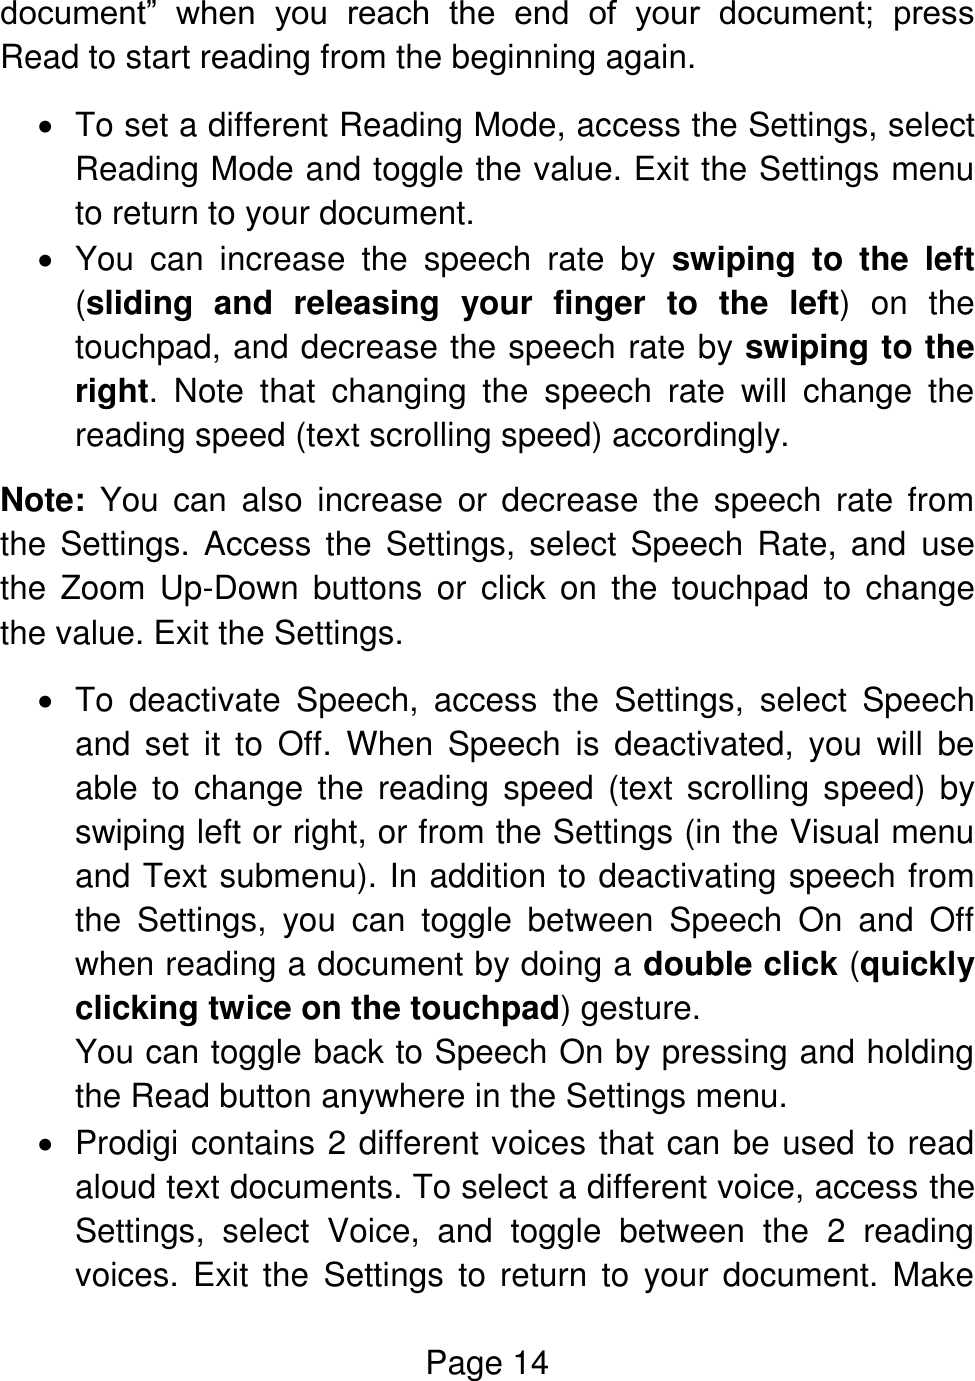 Page 14  document”  when  you  reach  the  end  of  your  document;  press Read to start reading from the beginning again.   To set a different Reading Mode, access the Settings, select Reading Mode and toggle the value. Exit the Settings menu to return to your document.   You  can  increase  the  speech  rate  by  swiping  to  the  left (sliding  and  releasing  your  finger to  the  left)  on  the touchpad, and decrease the speech rate by swiping to the right.  Note  that  changing  the  speech  rate  will  change  the reading speed (text scrolling speed) accordingly. Note:  You can  also  increase  or  decrease  the  speech  rate  from the Settings. Access  the Settings,  select  Speech  Rate, and  use the Zoom  Up-Down  buttons or  click  on  the  touchpad to change the value. Exit the Settings.   To  deactivate  Speech,  access  the  Settings,  select  Speech and  set  it  to  Off.  When  Speech  is  deactivated,  you  will  be able to change  the  reading speed  (text scrolling speed) by swiping left or right, or from the Settings (in the Visual menu and Text submenu). In addition to deactivating speech from the  Settings,  you  can  toggle  between  Speech  On  and  Off when reading a document by doing a double click (quickly clicking twice on the touchpad) gesture. You can toggle back to Speech On by pressing and holding the Read button anywhere in the Settings menu.   Prodigi contains 2 different voices that can be used to read aloud text documents. To select a different voice, access the Settings,  select  Voice,  and  toggle  between  the  2  reading voices.  Exit  the  Settings to return  to  your document. Make 